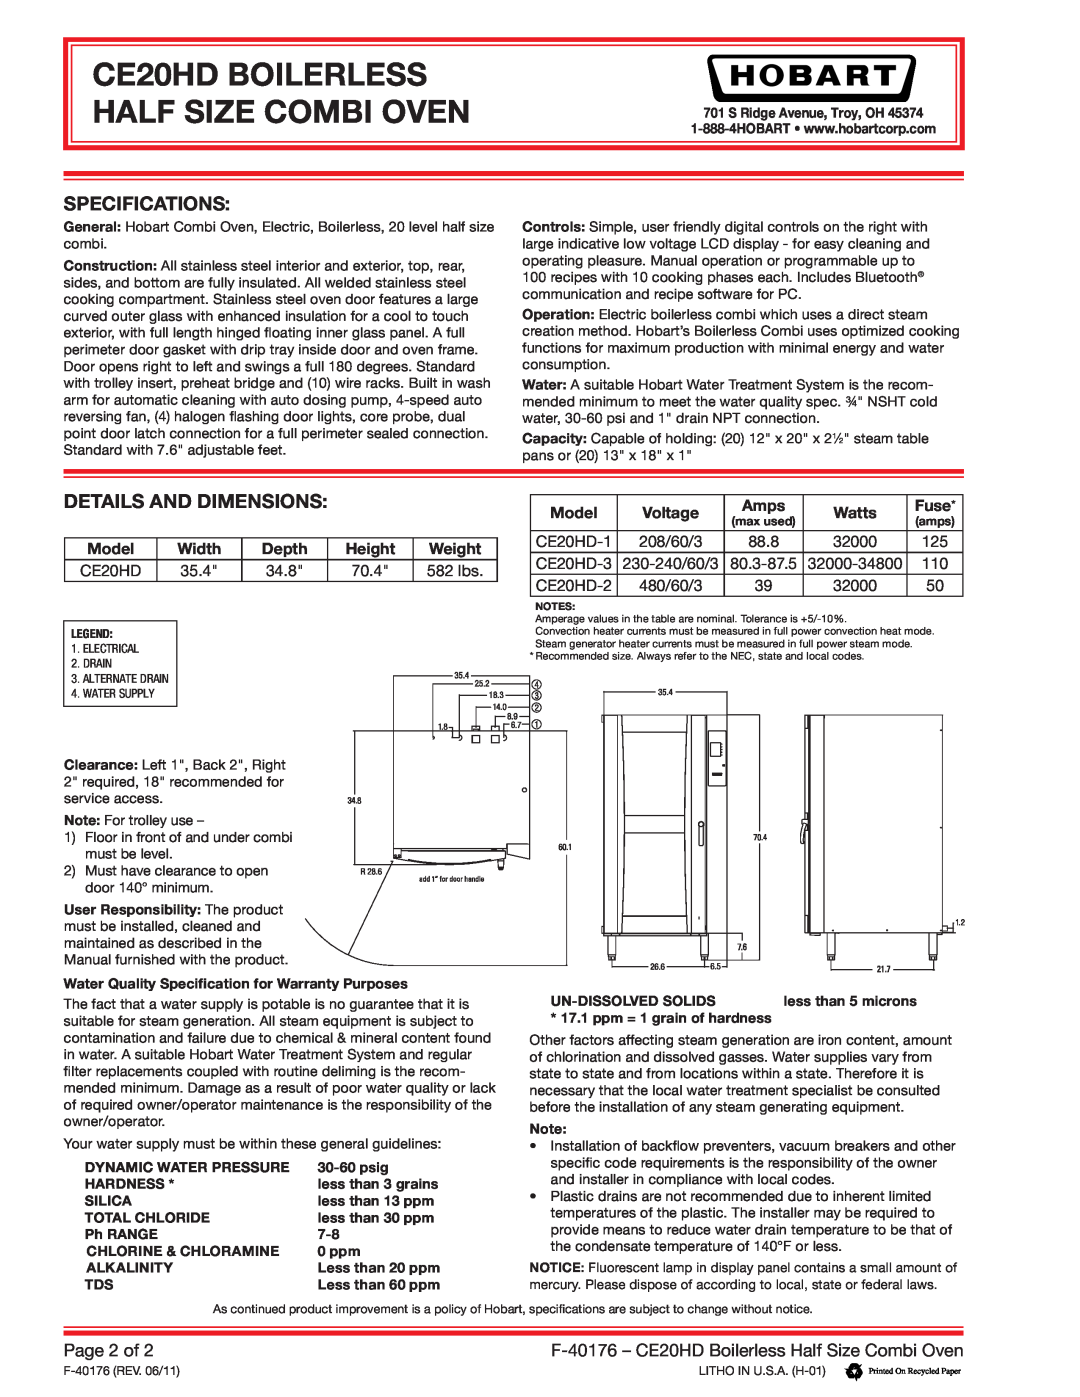 Hobart Specifications, Details And Dimensions, Page 2 of, CE20HD BOILERLESS HALF SIZE COMBI OVEN, Model, Width, Depth 